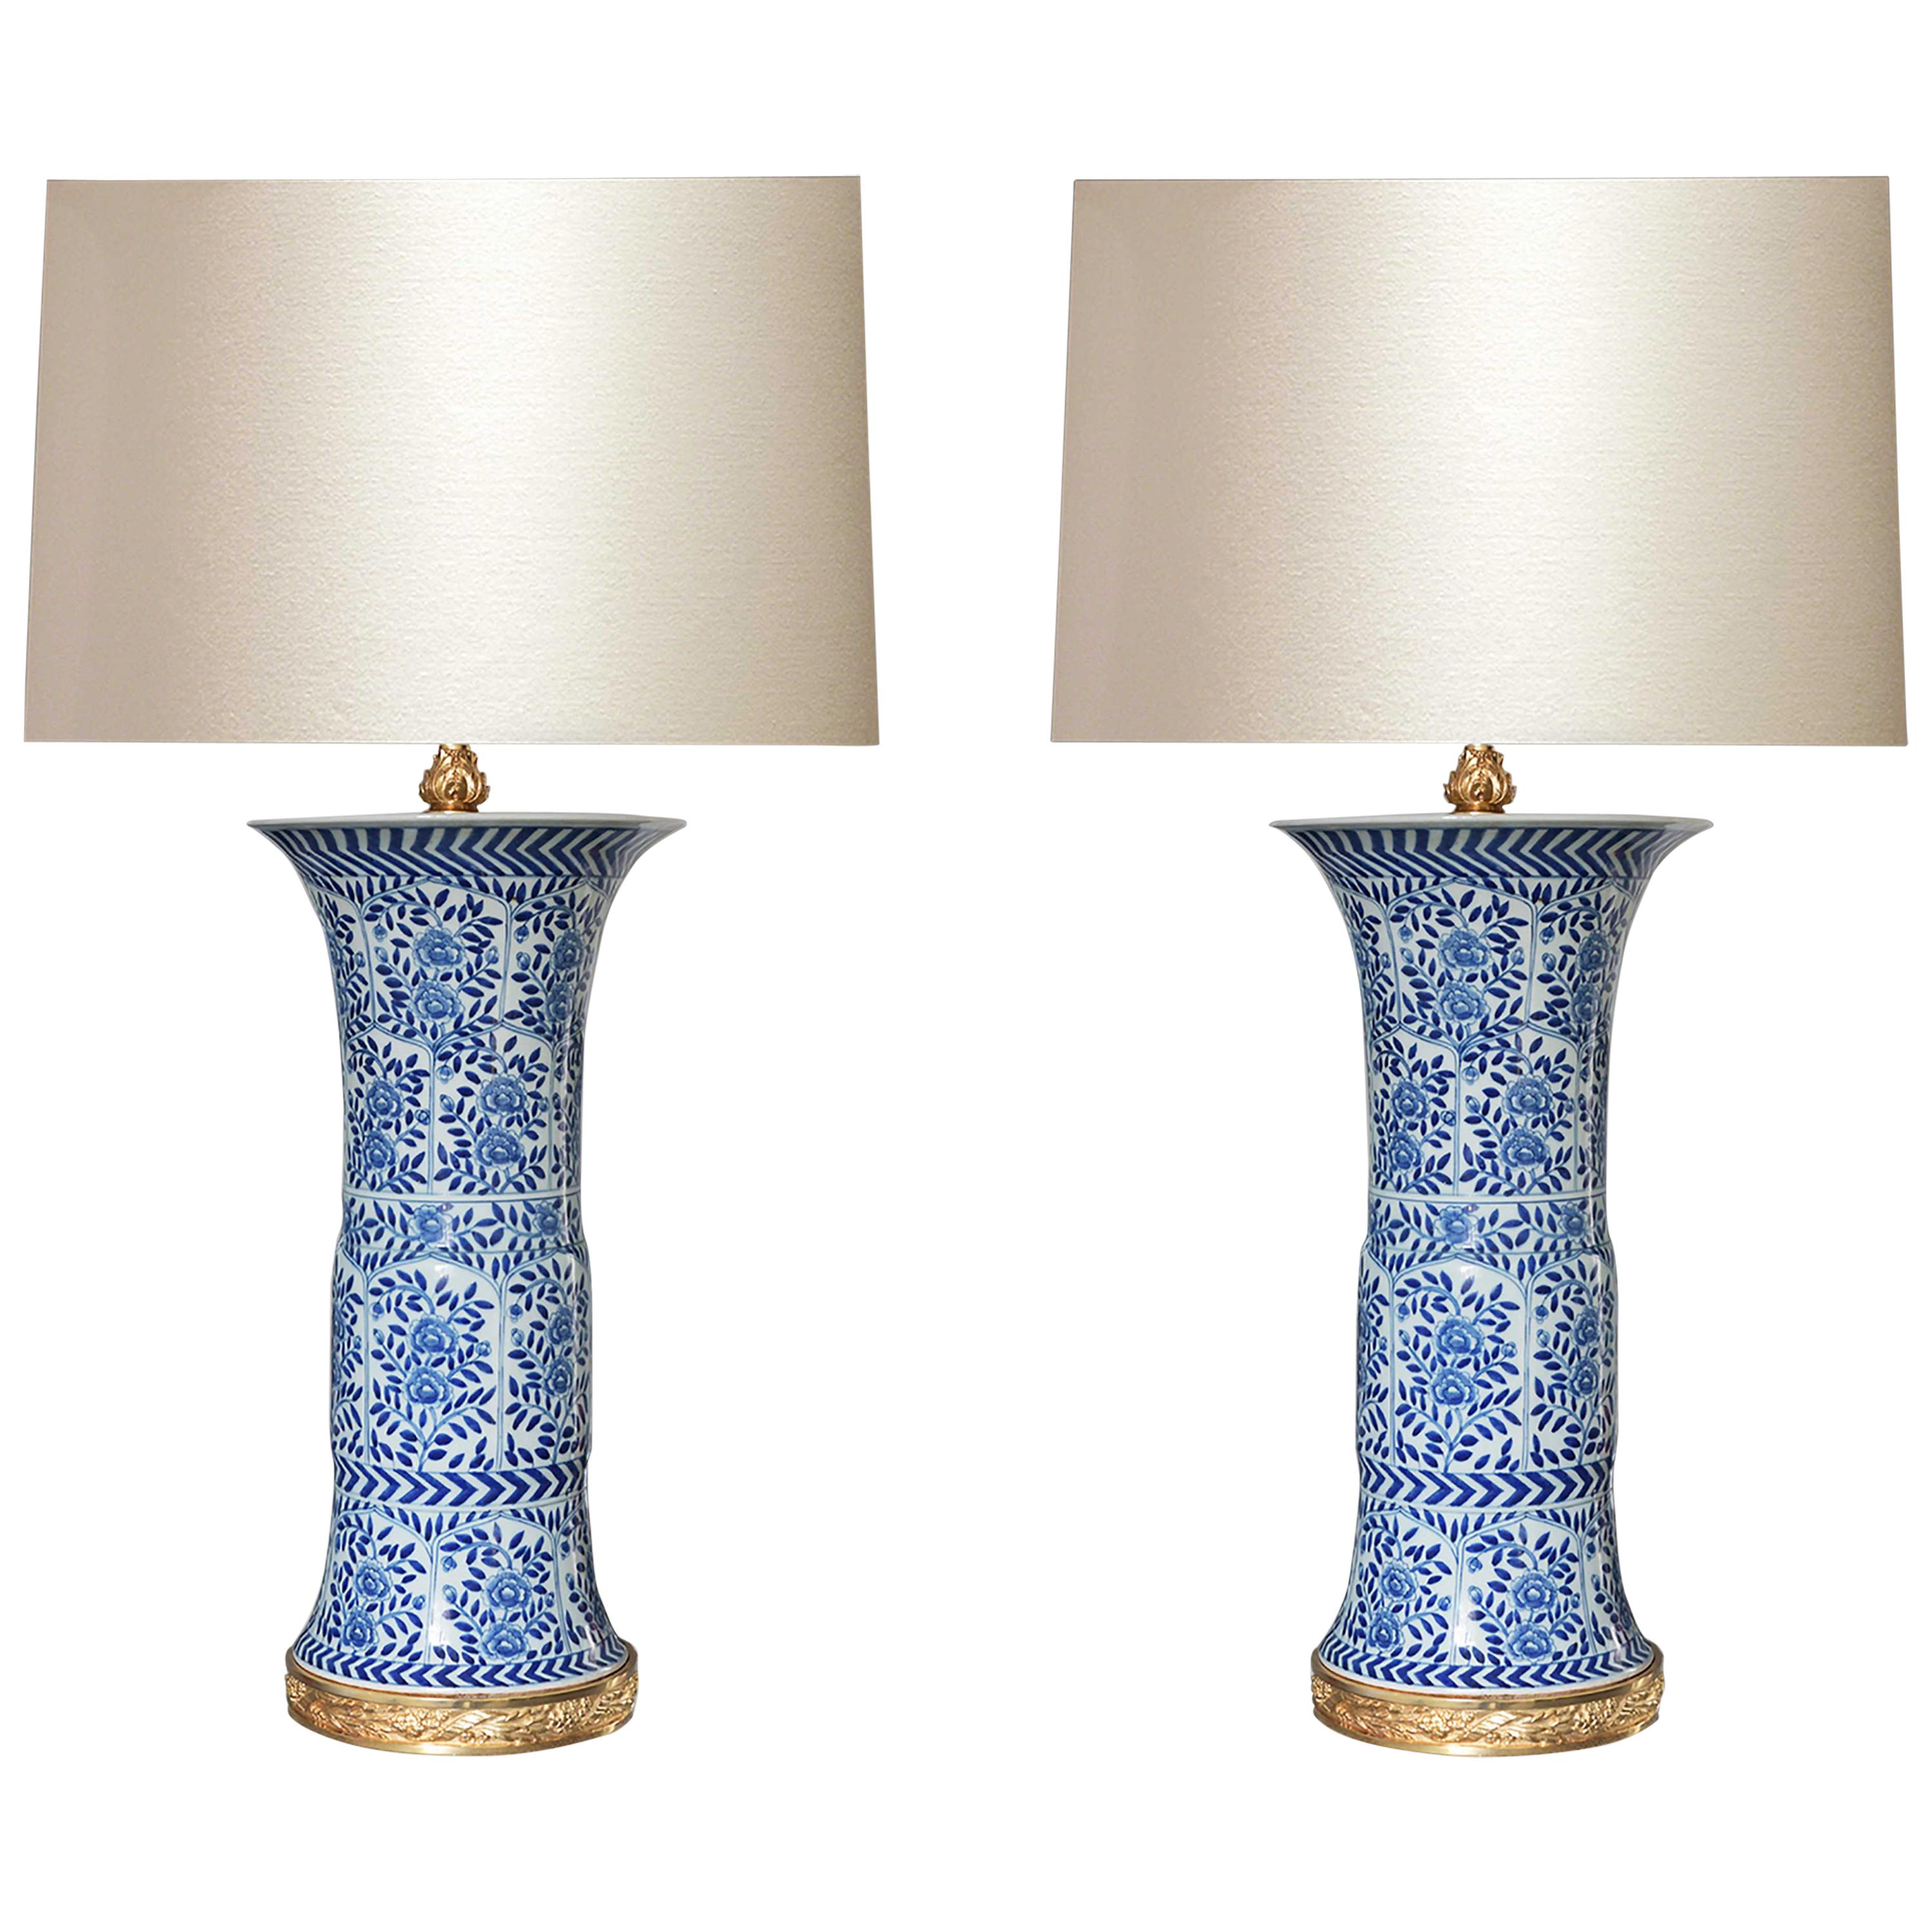 Pair of Blue and White Porcelain Lamps For Sale